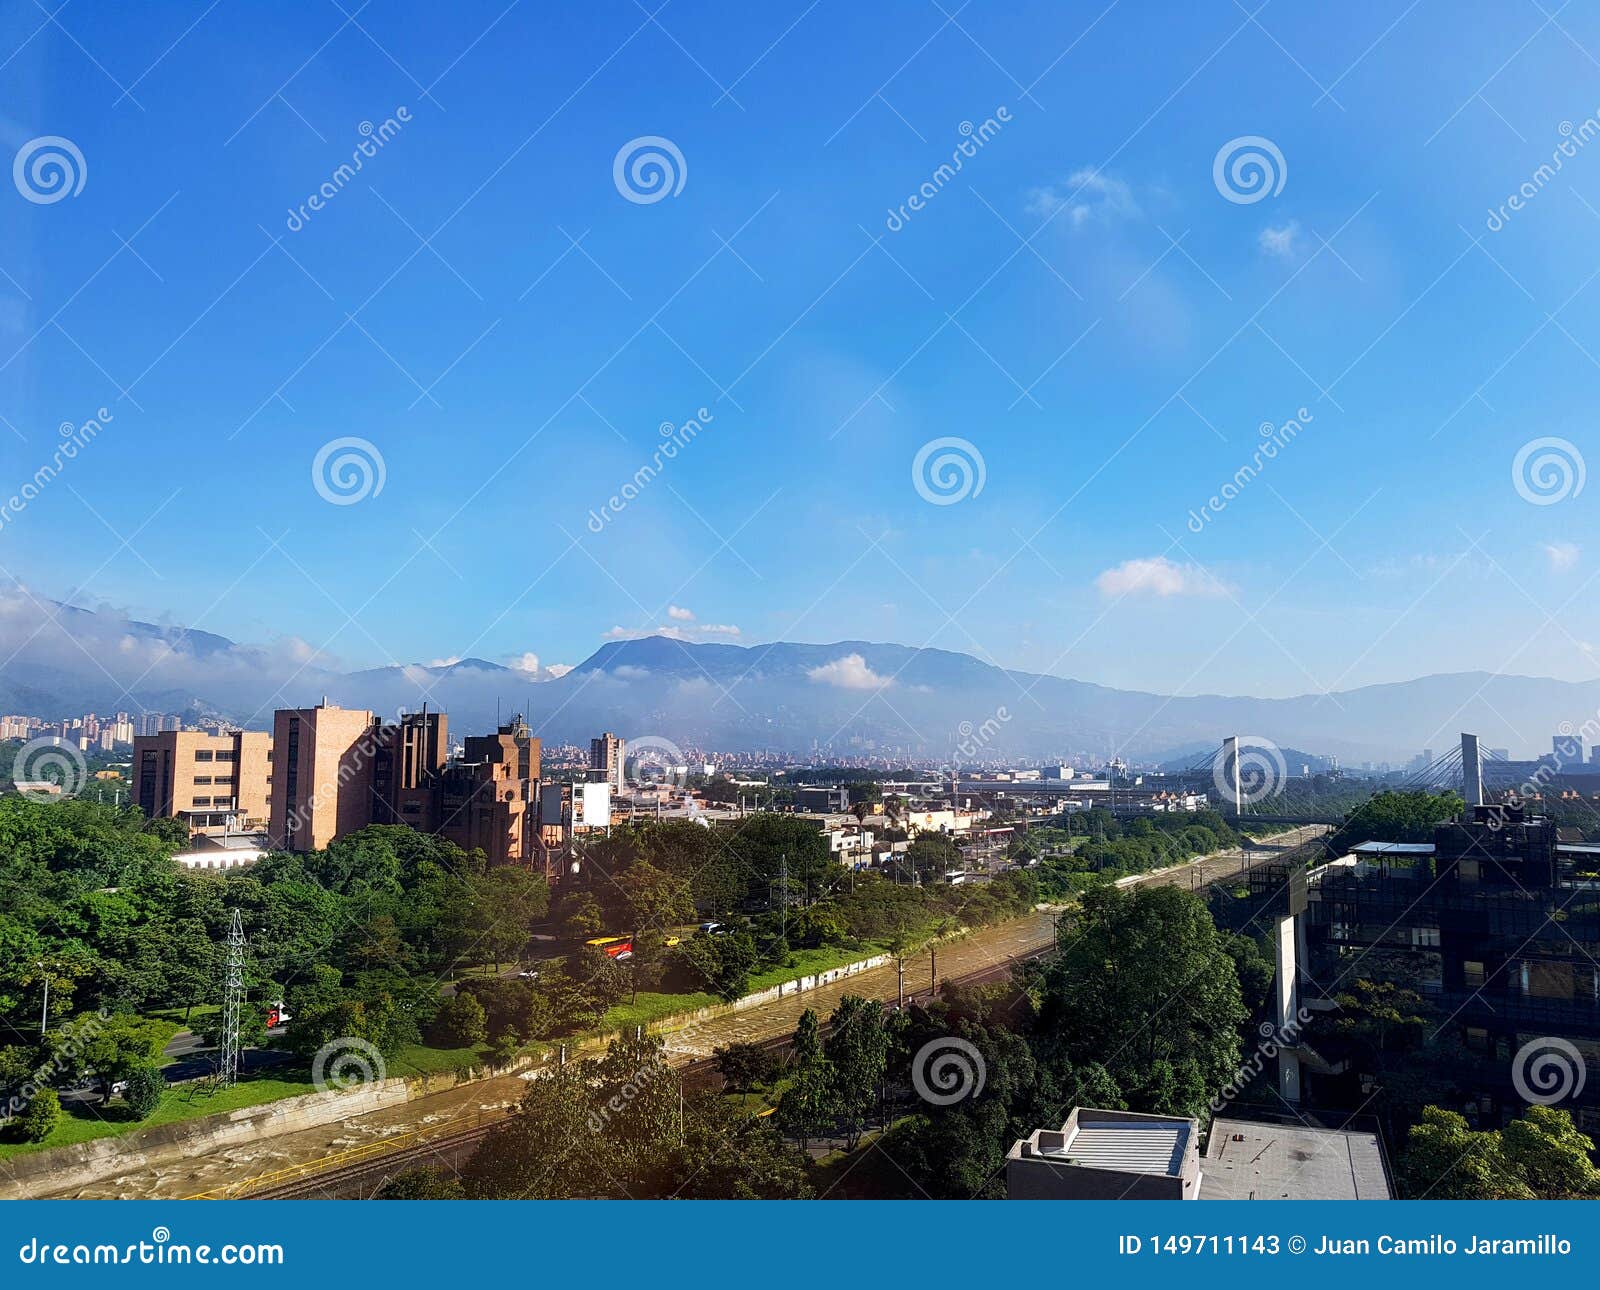 amazing panoramic view or landscape of the city of medellin in colombia, with skybuildings and parks of el poblado town